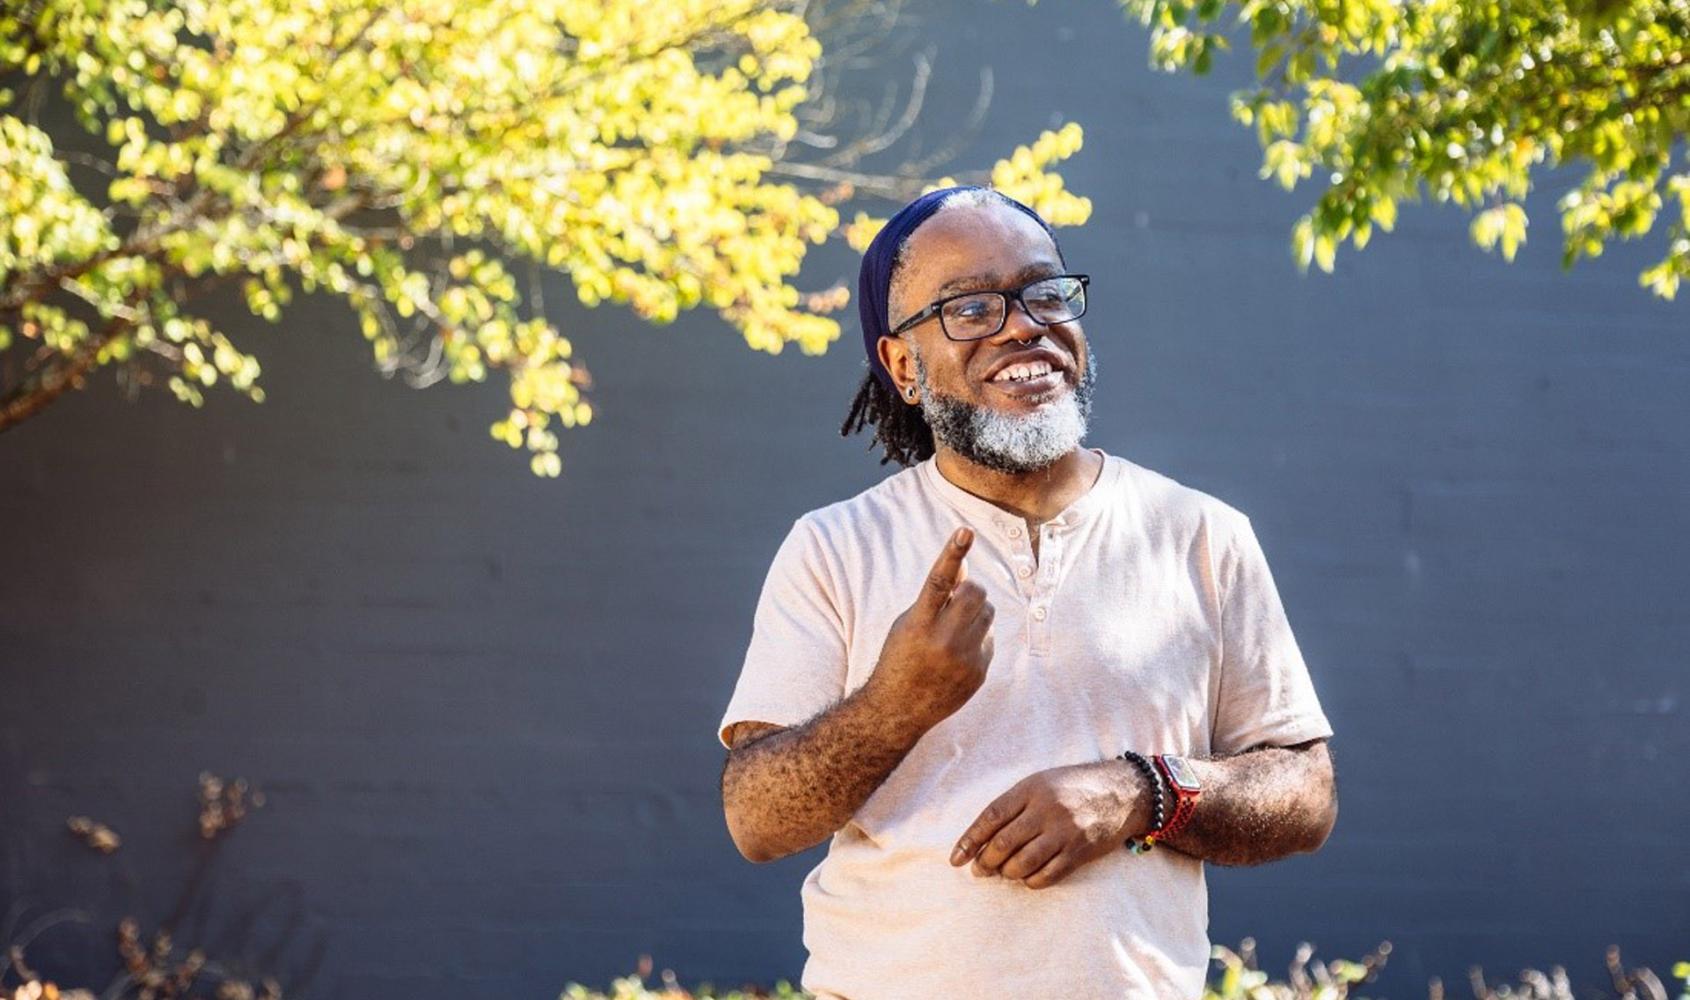 A Deaf Black man smiles and looks at something in the distance while signing. The man has glasses, a beard, and septum piercing, and stands outdoors in front of a black wall with sunkissed foliage while wearing a peach shirt, smartwatch, beaded bracelet, and hair tied back with a bandana. Image courtesy of Disabled and Here.